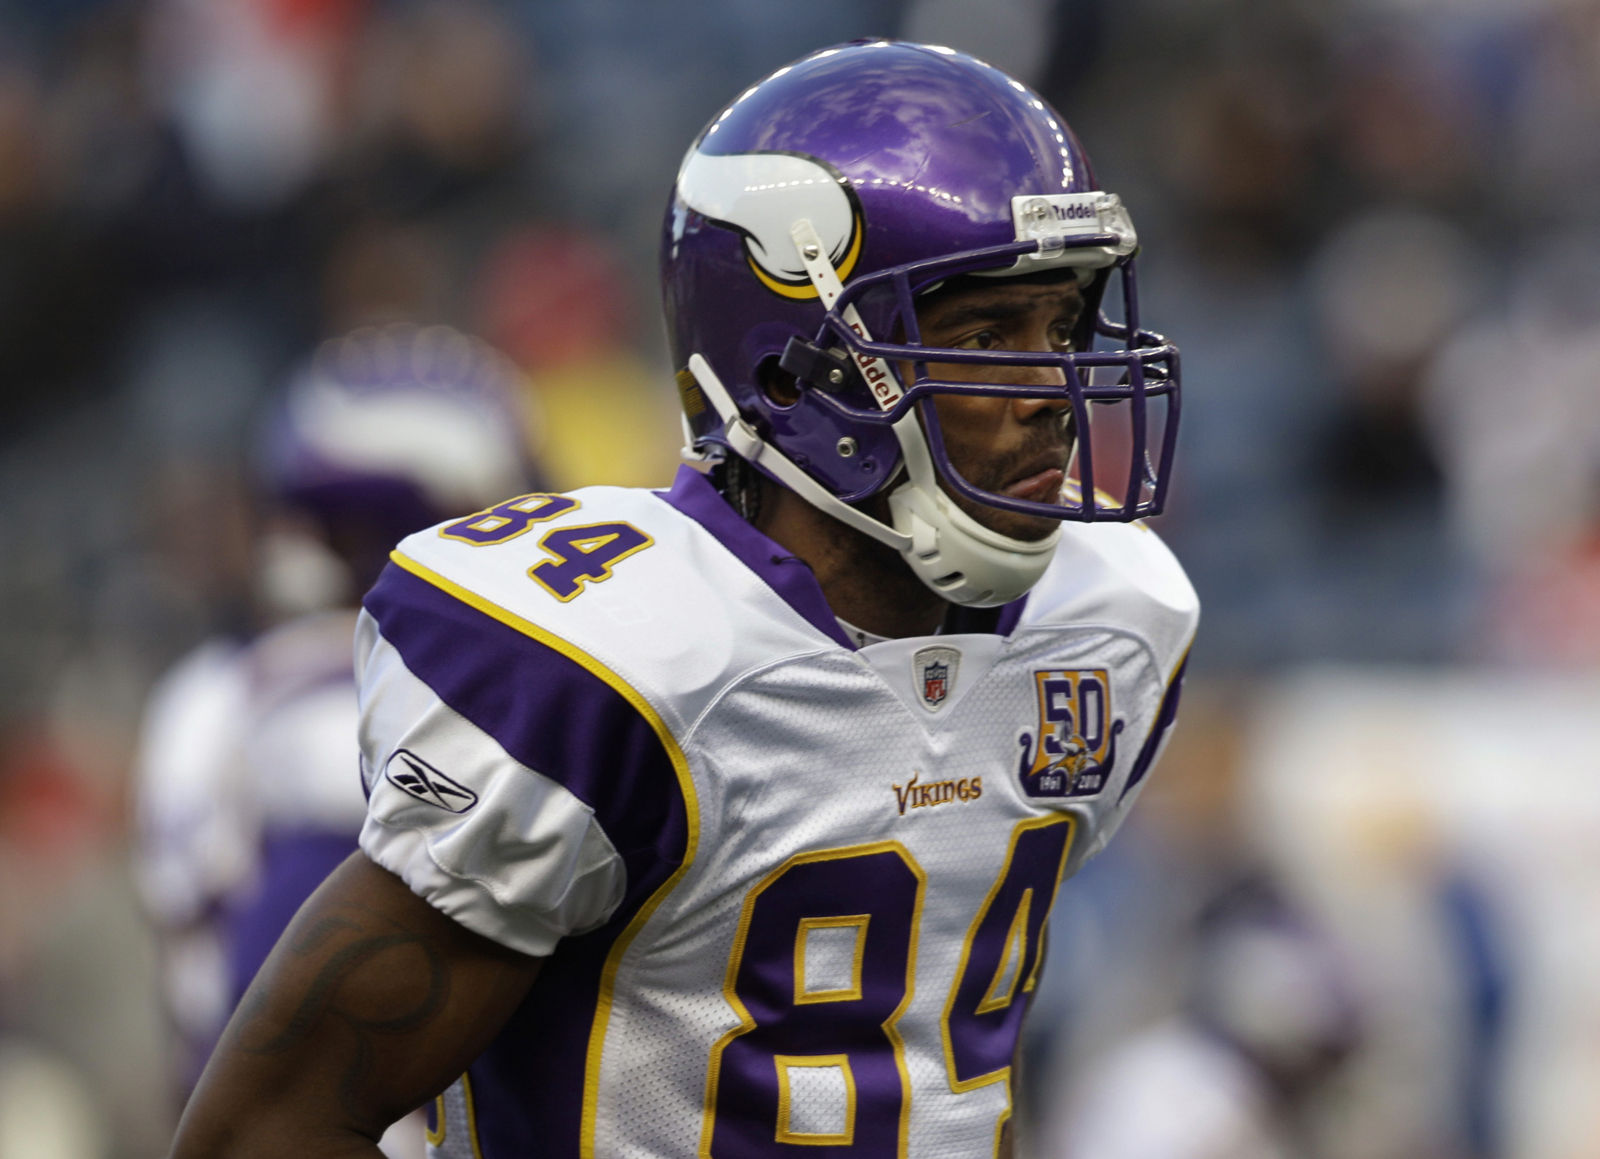 Wide reciever Randy Moss also made it in his first yearof elgibility. Moss burst onto the scene with the Vikings in 1998 and wound up playing for five teams. File. (AP Photo/Stephan Savoia, File)